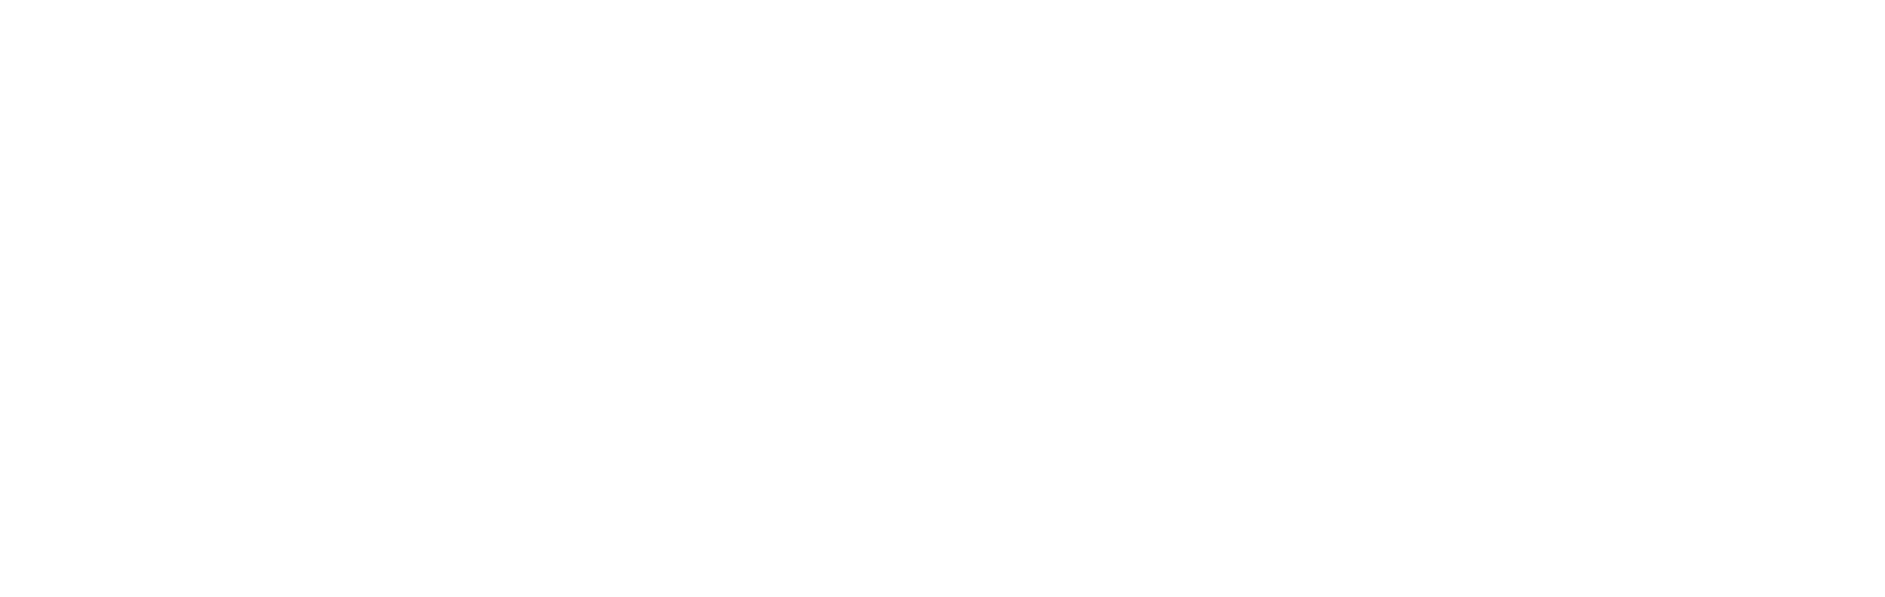 https://silverneedle.vc/wp-content/uploads/2022/08/Silverneedle-Logo-wHITE.png